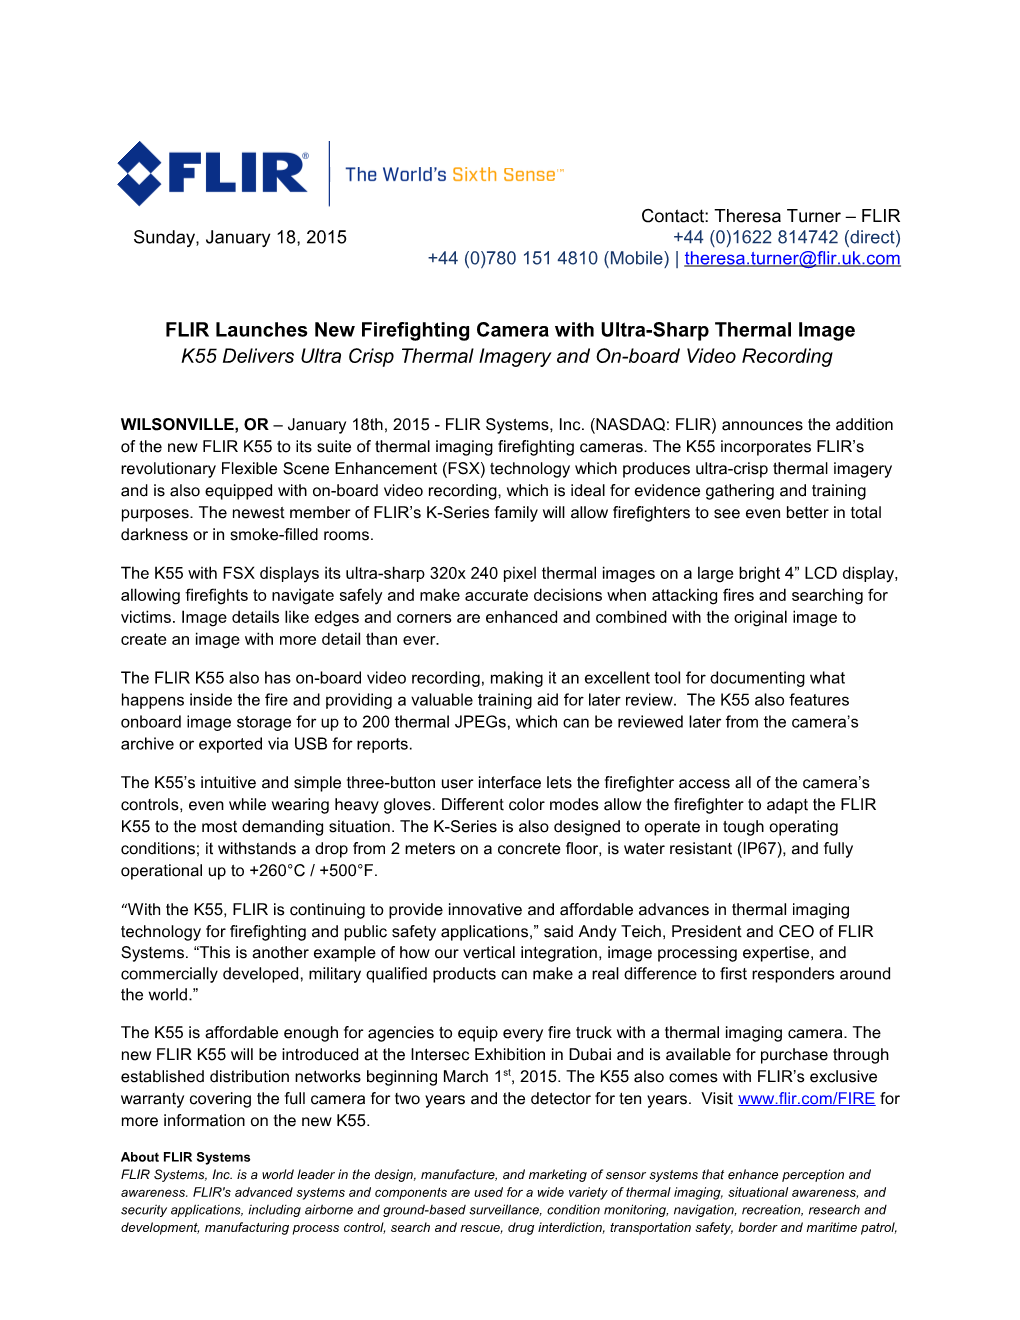 FLIR Launches New Firefighting Camera with Ultra-Sharp Thermal Image